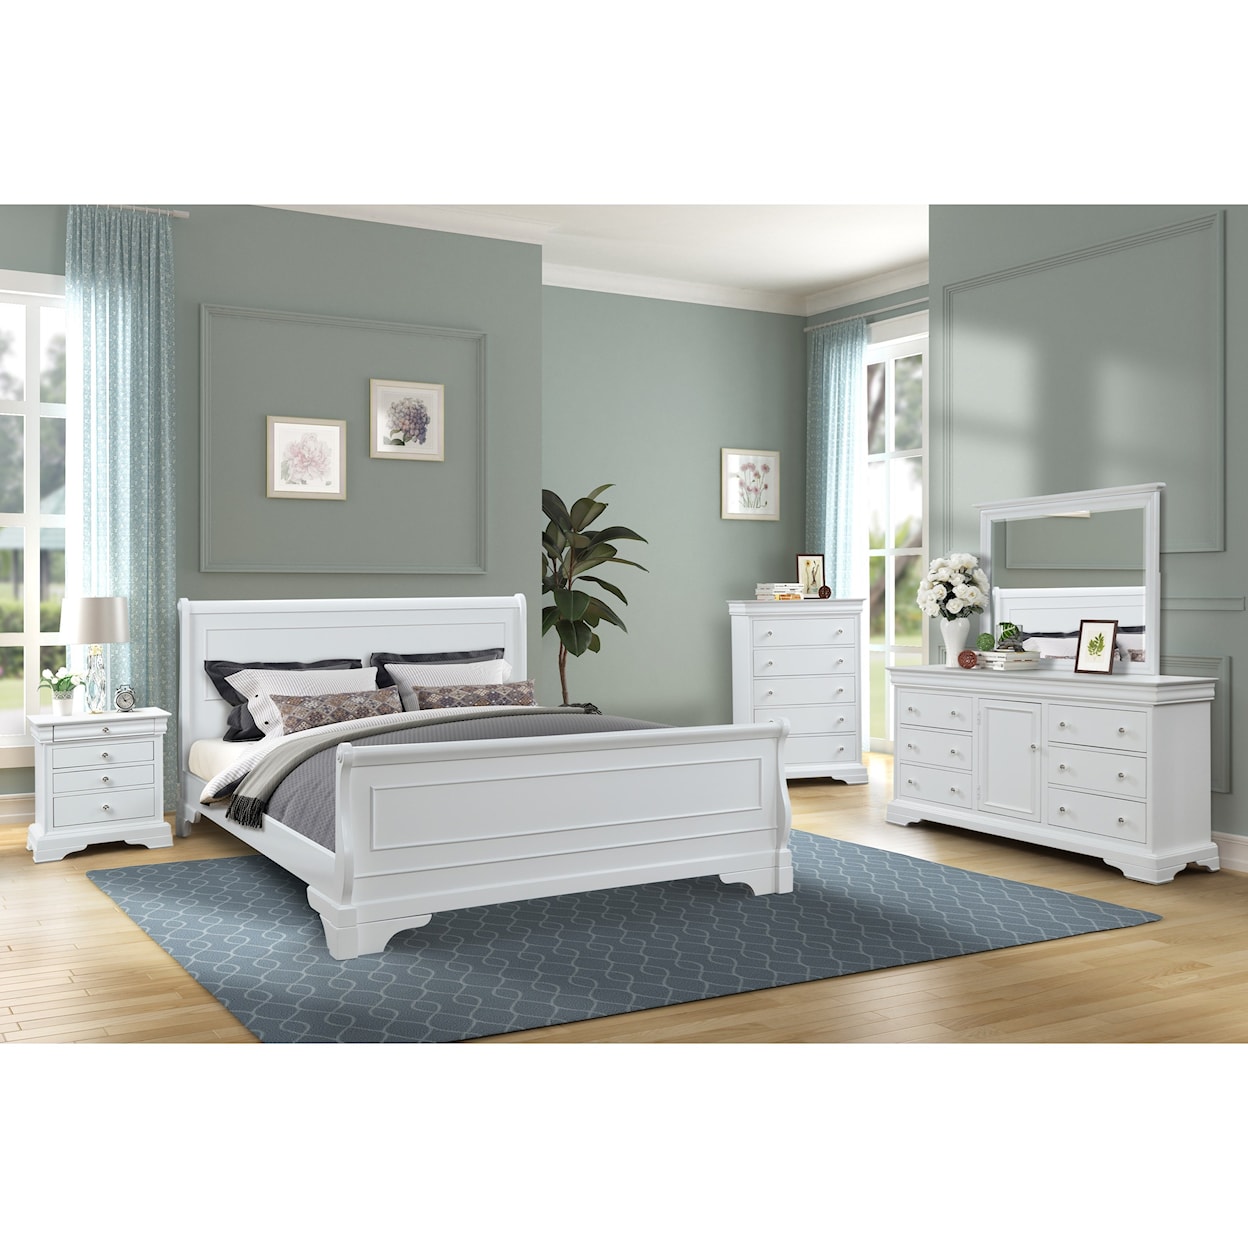 New Classic Furniture Versaille King Bedroom Group